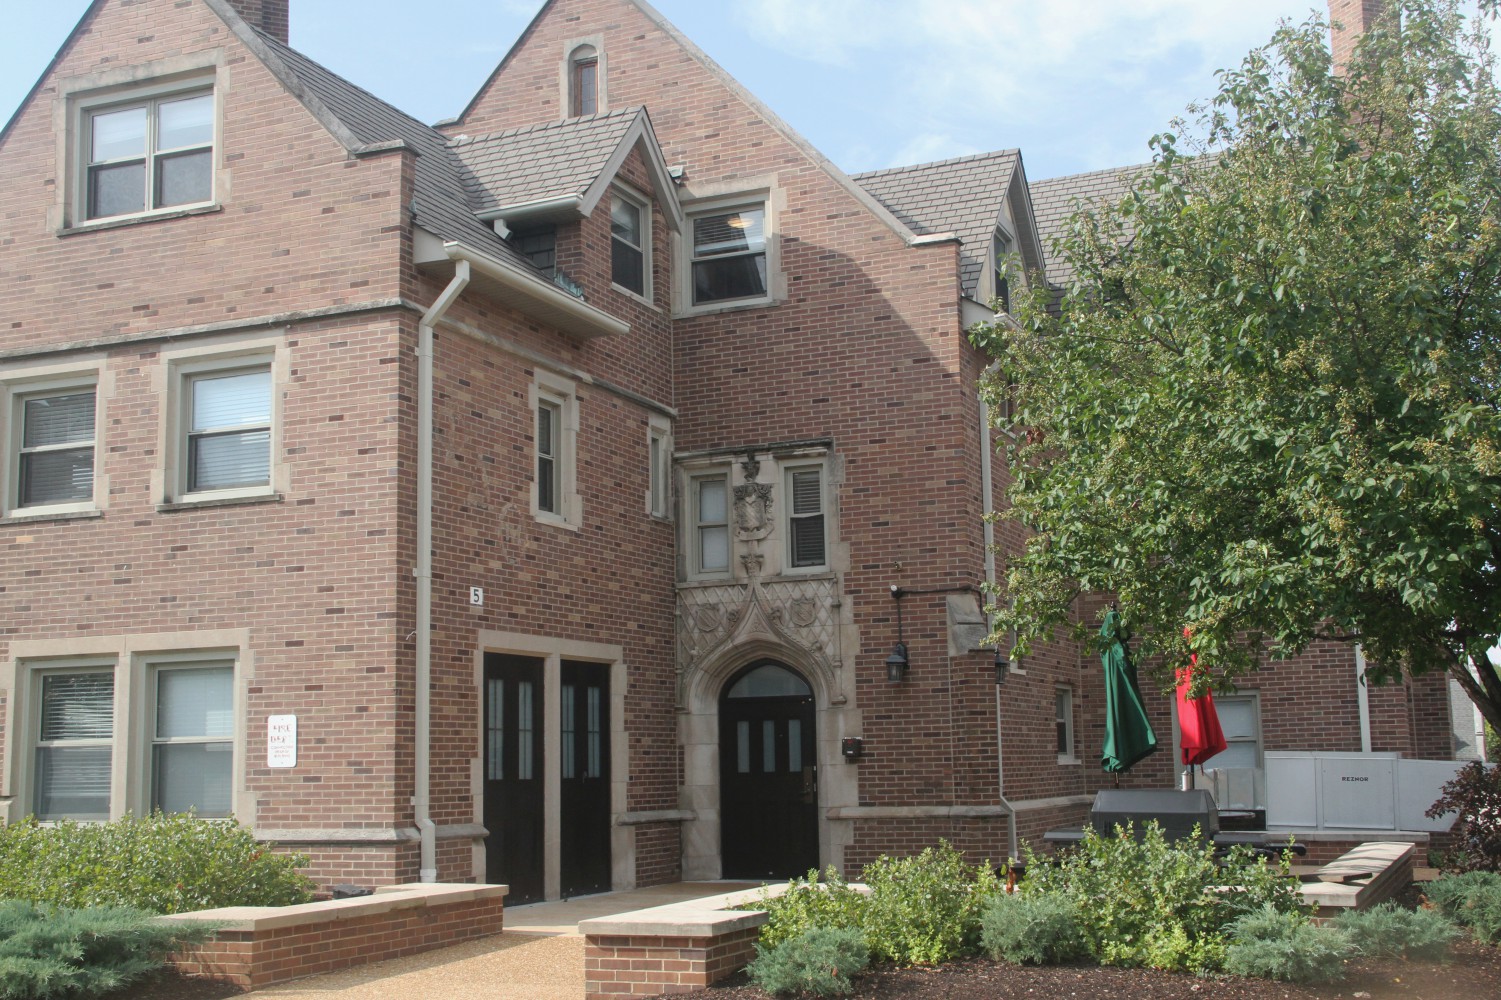 The Hamsini Living Learning Community is the first dedicated housing for an identity group on campus. The house hosts programming for its residents and the Wash. U. community.